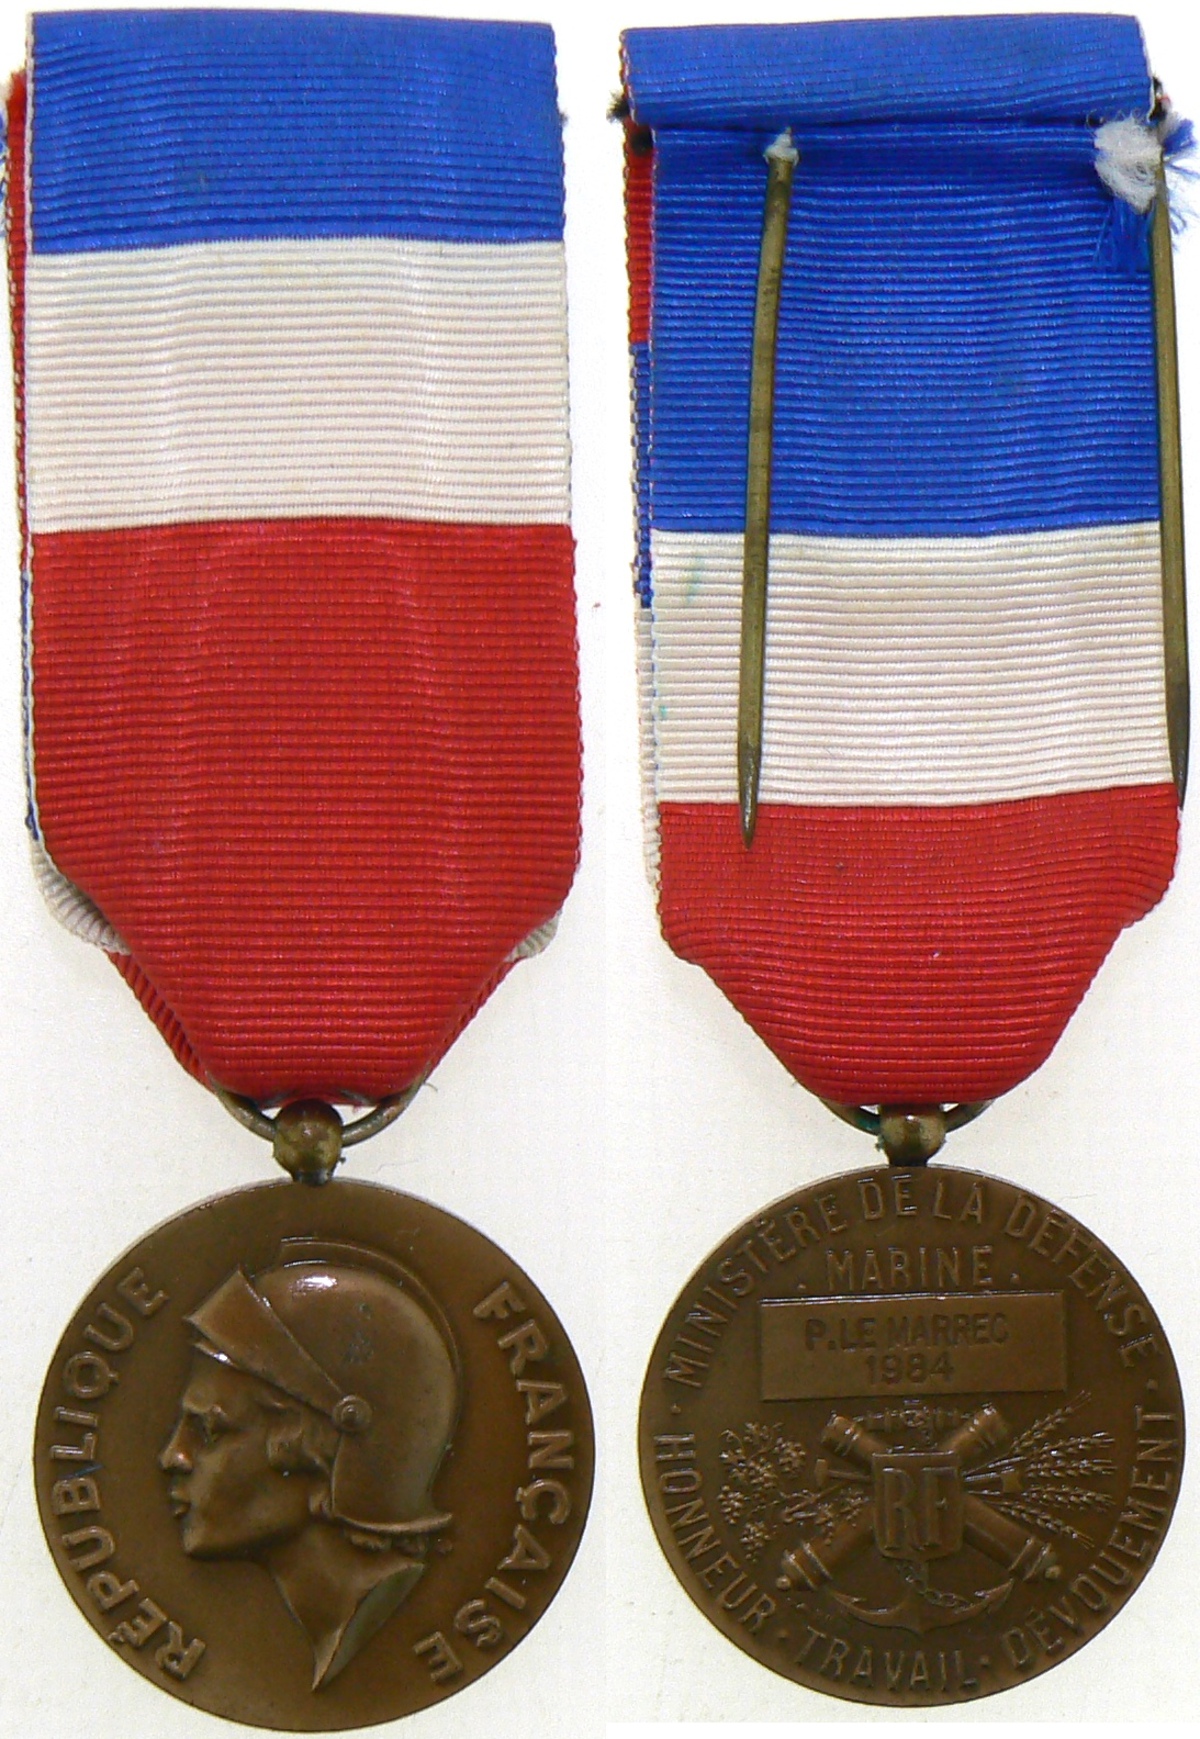 Honor Medal of the Defense Ministry, for Civil - Image 2 of 2